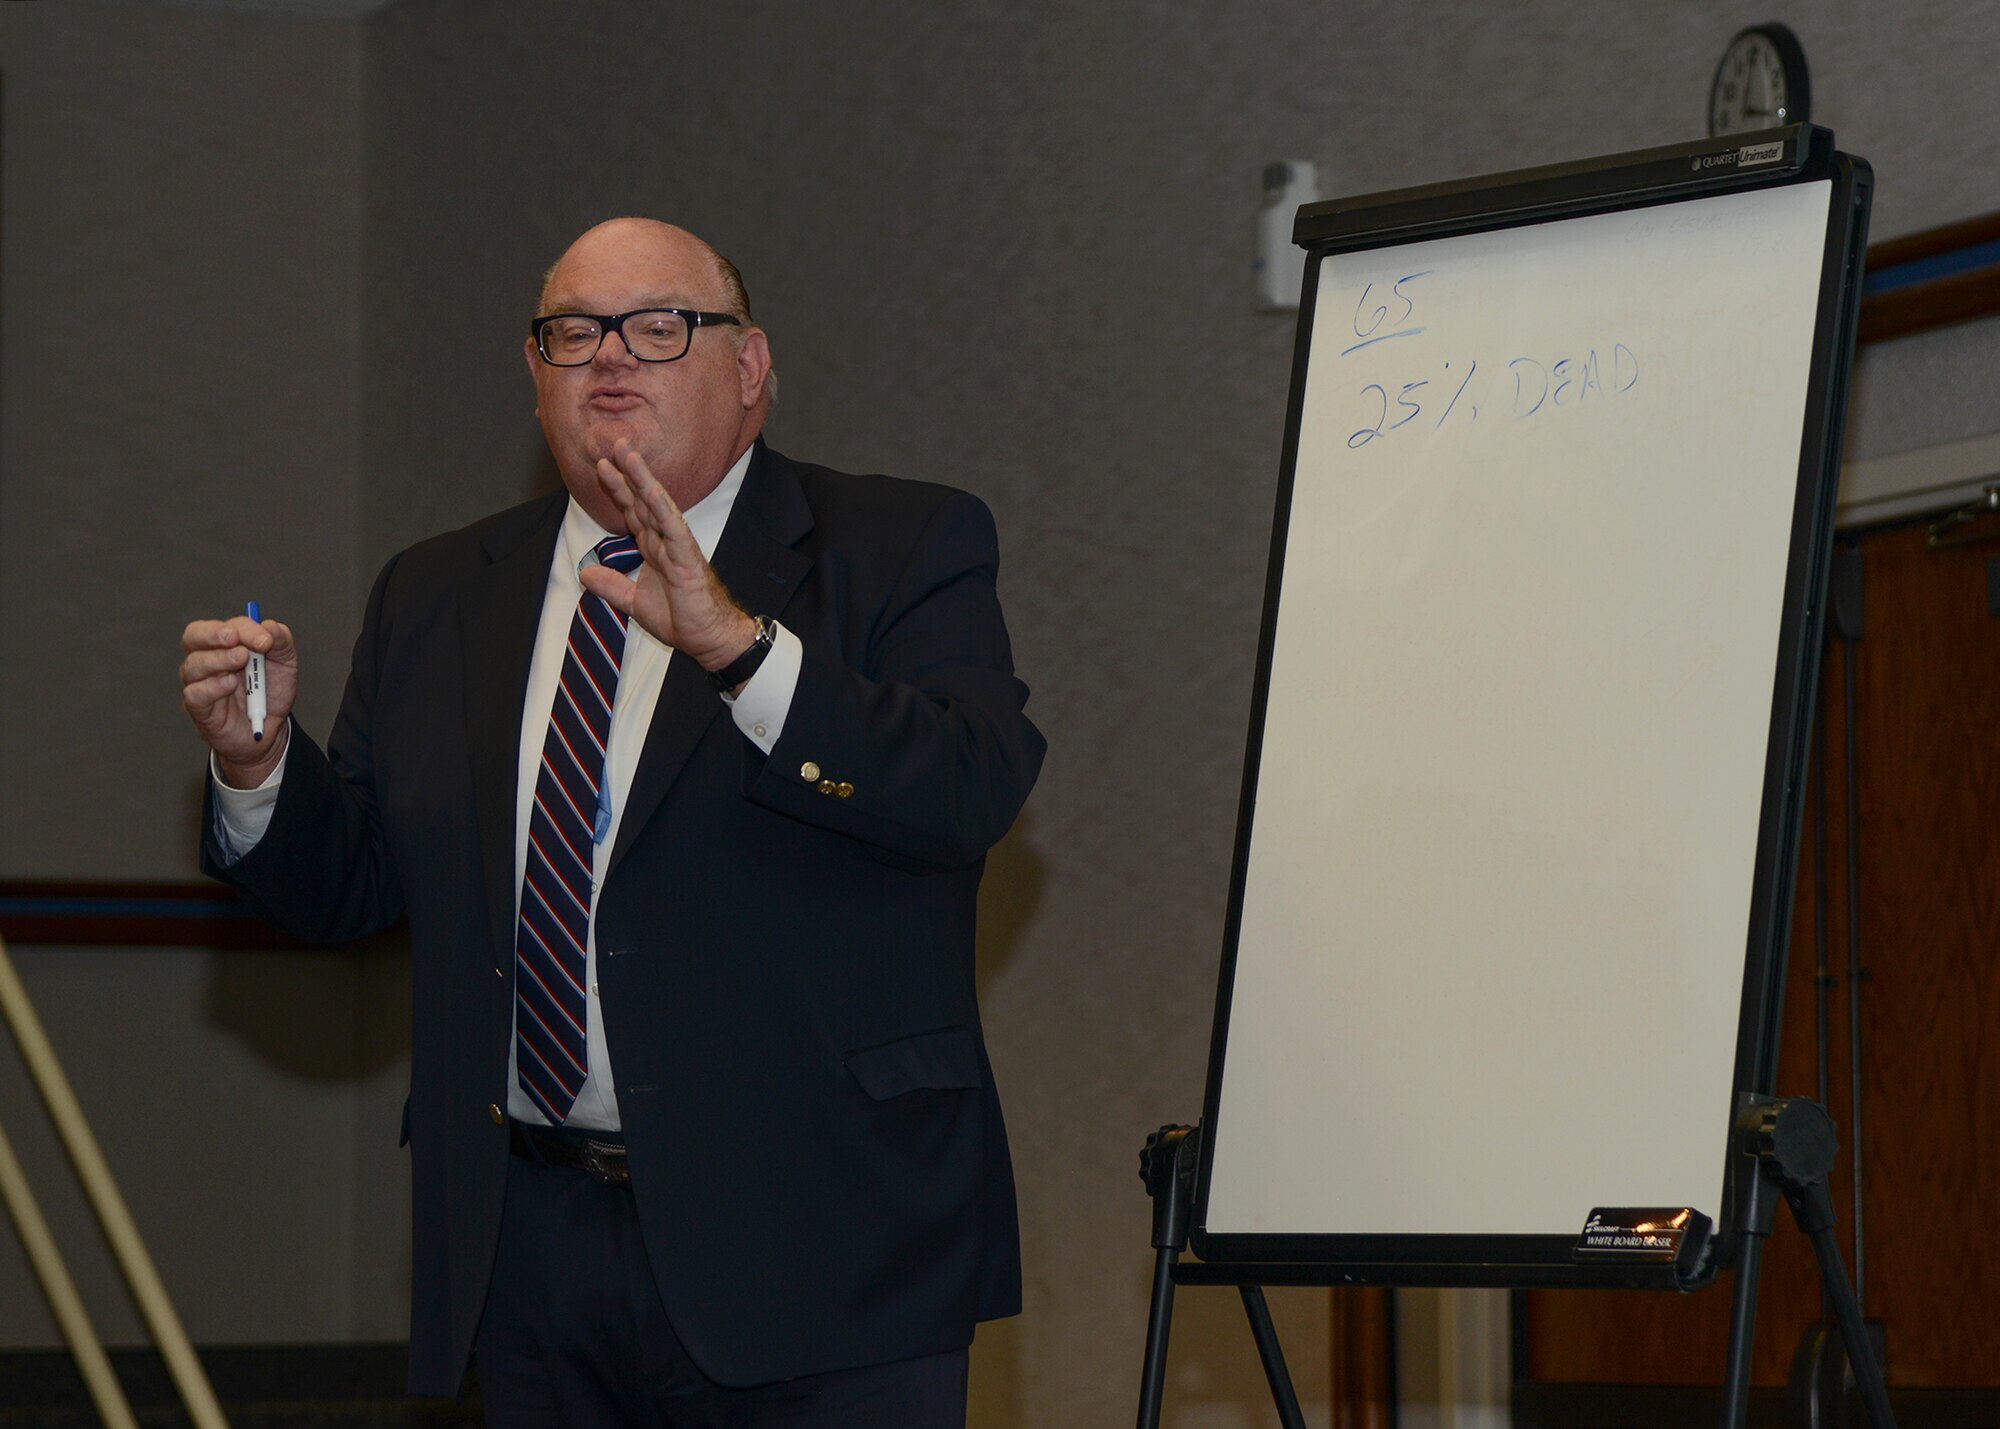 Financial Advisor Scott Alexander taught home buyer’s seminar attendees how to financially prepare for home ownership, outlining the various types of loans available to buyers. (U.S. Air Force photo by Rebecca Amber)